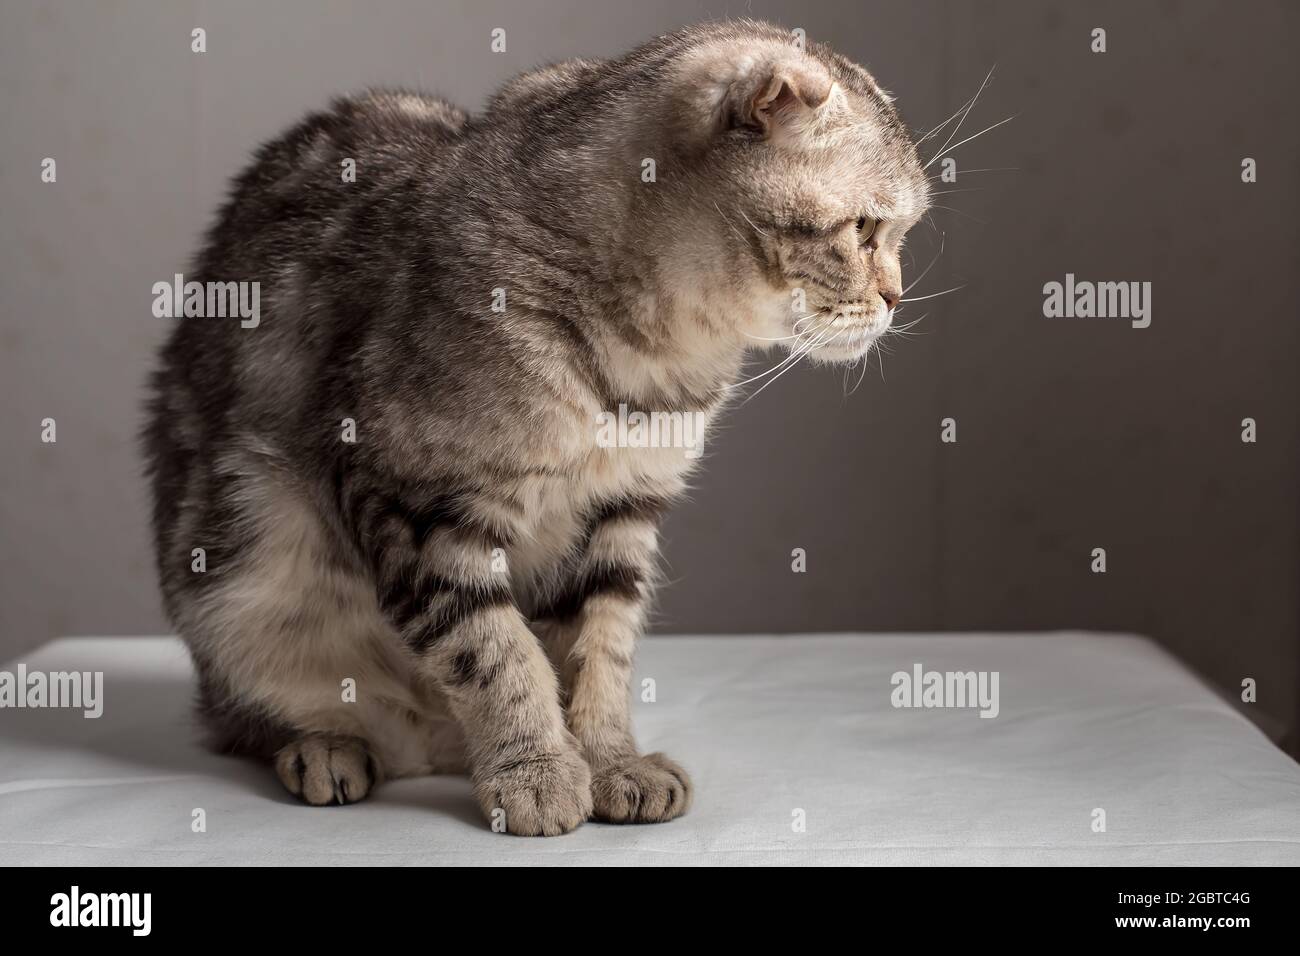 Bewildered Scottish Fold cat sits on a table and stares with interest. Stock Photo